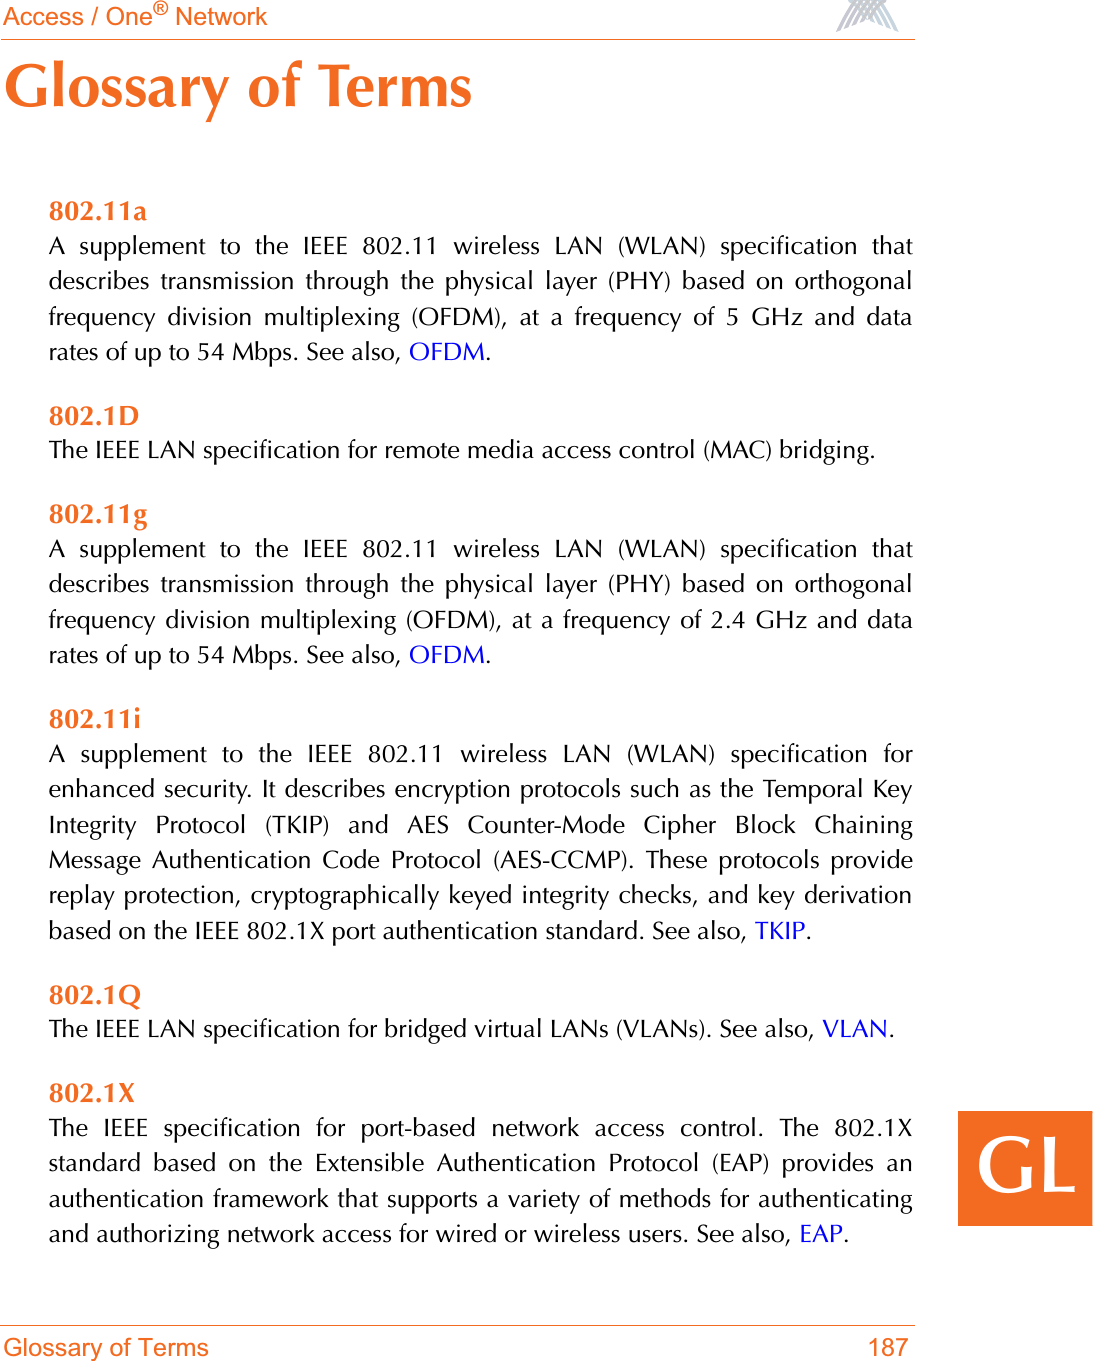 Access / One® NetworkGlossary of Terms 187GLGlossary of Terms802.11aA supplement to the IEEE 802.11 wireless LAN (WLAN) specification thatdescribes transmission through the physical layer (PHY) based on orthogonalfrequency division multiplexing (OFDM), at a frequency of 5 GHz and datarates of up to 54 Mbps. See also, OFDM.802.1DThe IEEE LAN specification for remote media access control (MAC) bridging.802.11gA supplement to the IEEE 802.11 wireless LAN (WLAN) specification thatdescribes transmission through the physical layer (PHY) based on orthogonalfrequency division multiplexing (OFDM), at a frequency of 2.4 GHz and datarates of up to 54 Mbps. See also, OFDM.802.11iA supplement to the IEEE 802.11 wireless LAN (WLAN) specification forenhanced security. It describes encryption protocols such as the Temporal KeyIntegrity Protocol (TKIP) and AES Counter-Mode Cipher Block ChainingMessage Authentication Code Protocol (AES-CCMP). These protocols providereplay protection, cryptographically keyed integrity checks, and key derivationbased on the IEEE 802.1X port authentication standard. See also, TKIP.802.1QThe IEEE LAN specification for bridged virtual LANs (VLANs). See also, VLAN.802.1XThe IEEE specification for port-based network access control. The 802.1Xstandard based on the Extensible Authentication Protocol (EAP) provides anauthentication framework that supports a variety of methods for authenticatingand authorizing network access for wired or wireless users. See also, EAP.